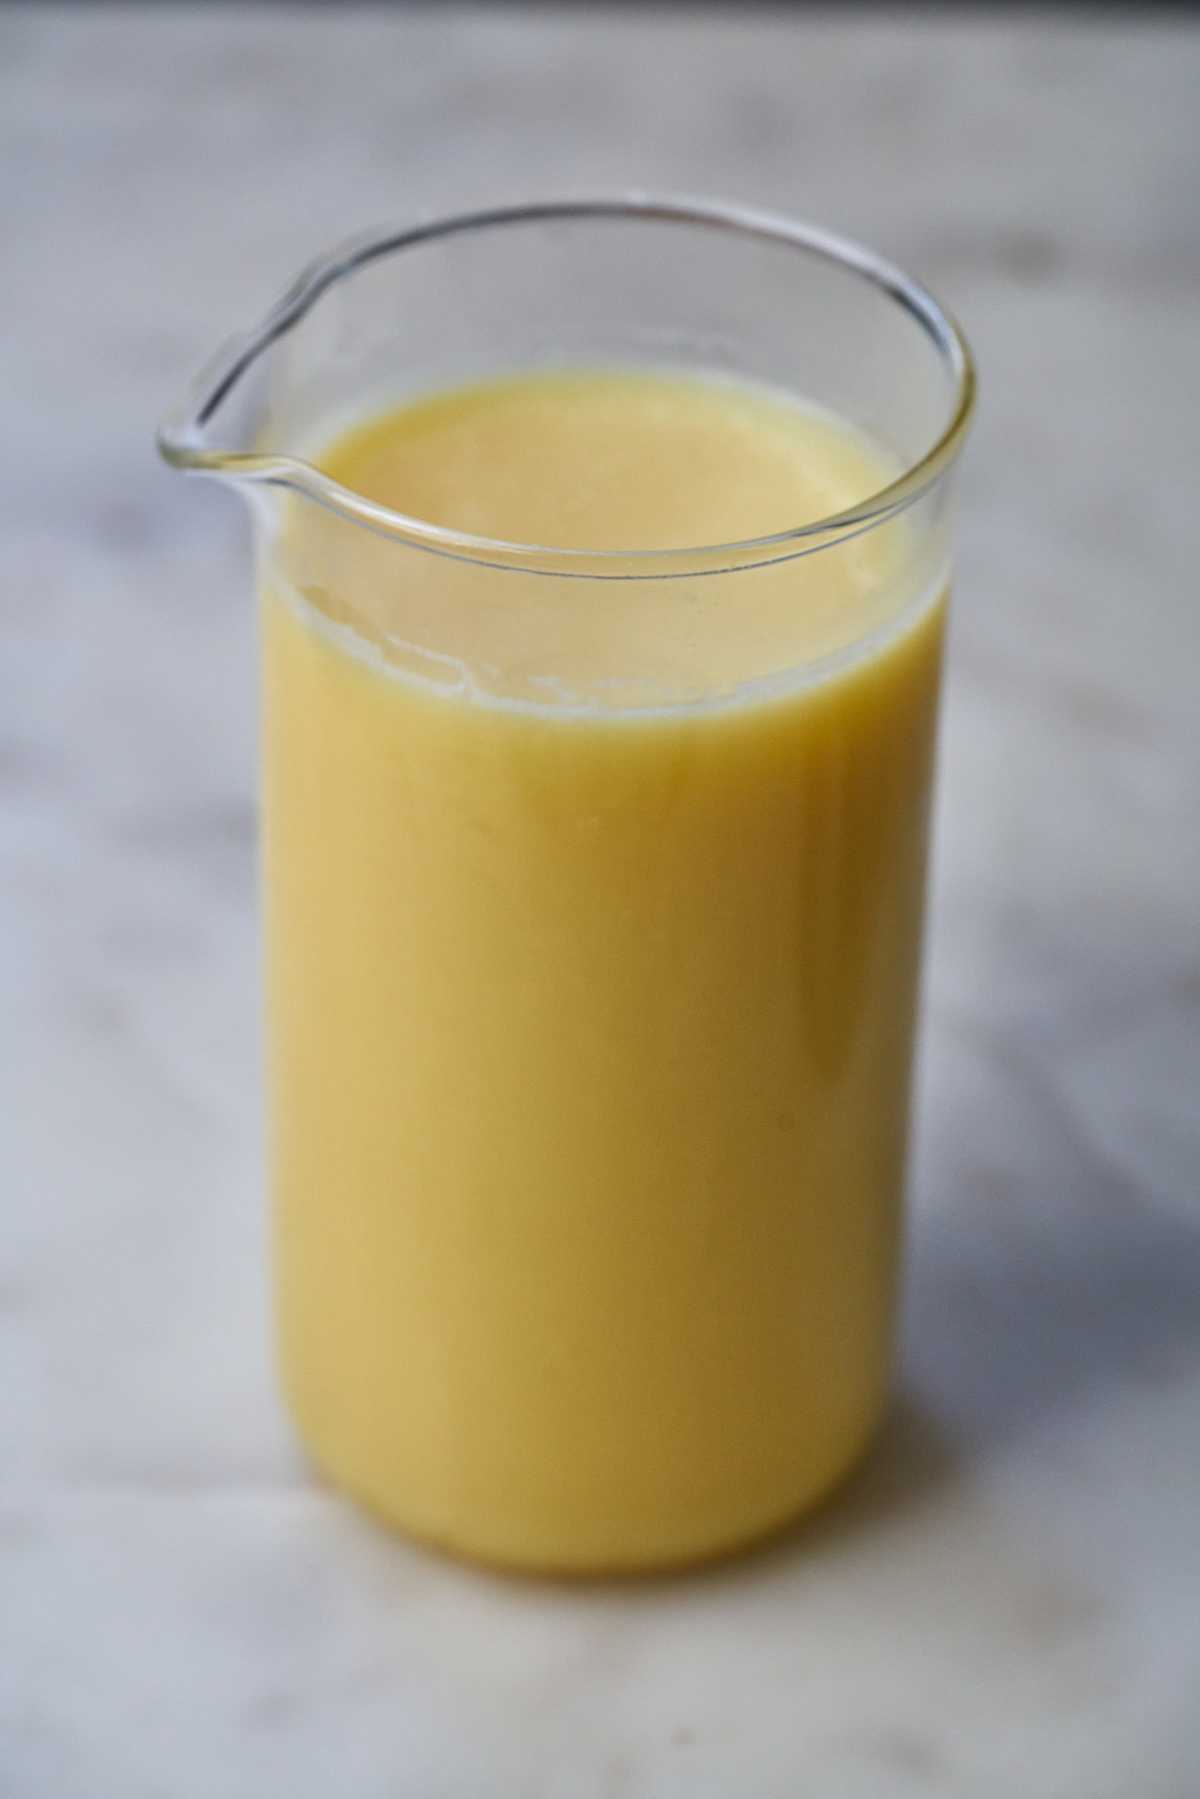 Ghee in a glass with a spout.